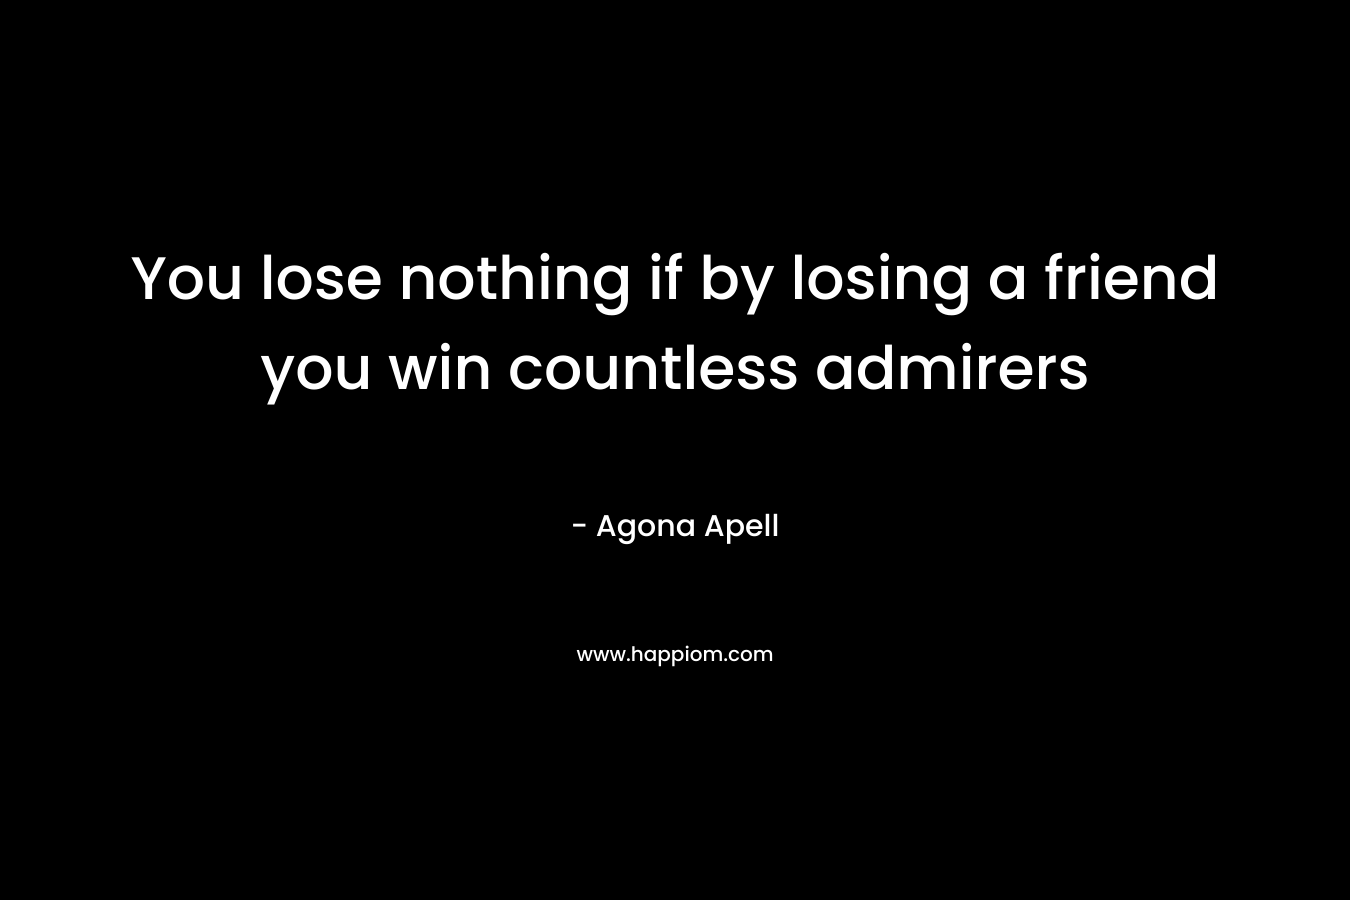 You lose nothing if by losing a friend you win countless admirers